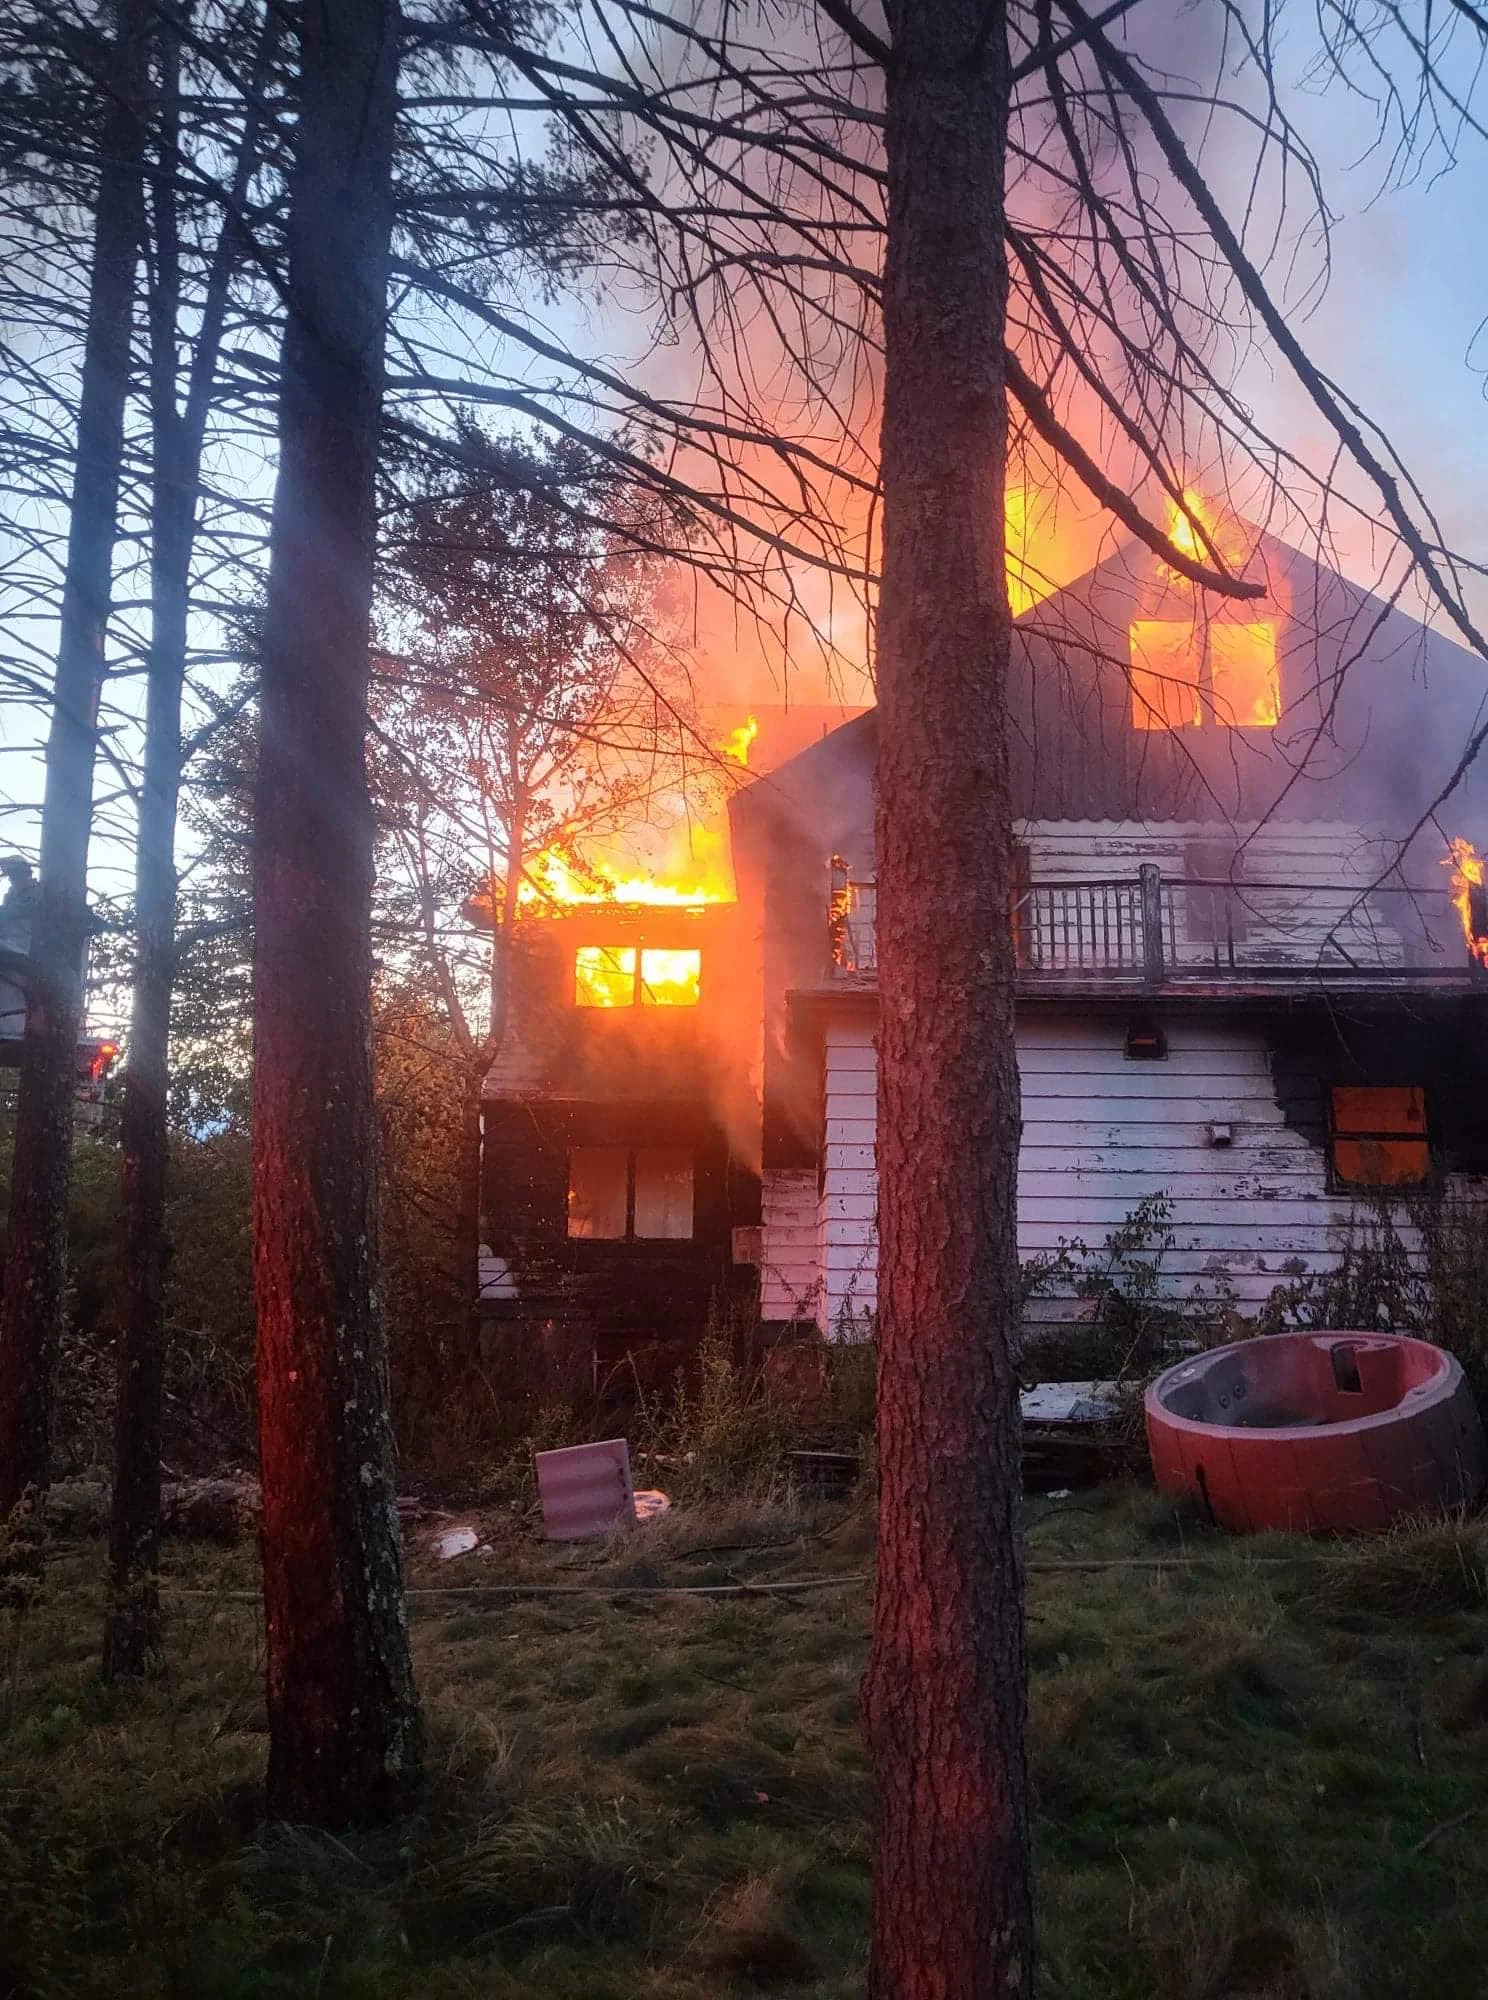 Upstate New York Hotel That Inspired Dirty Dancing Destroyed image